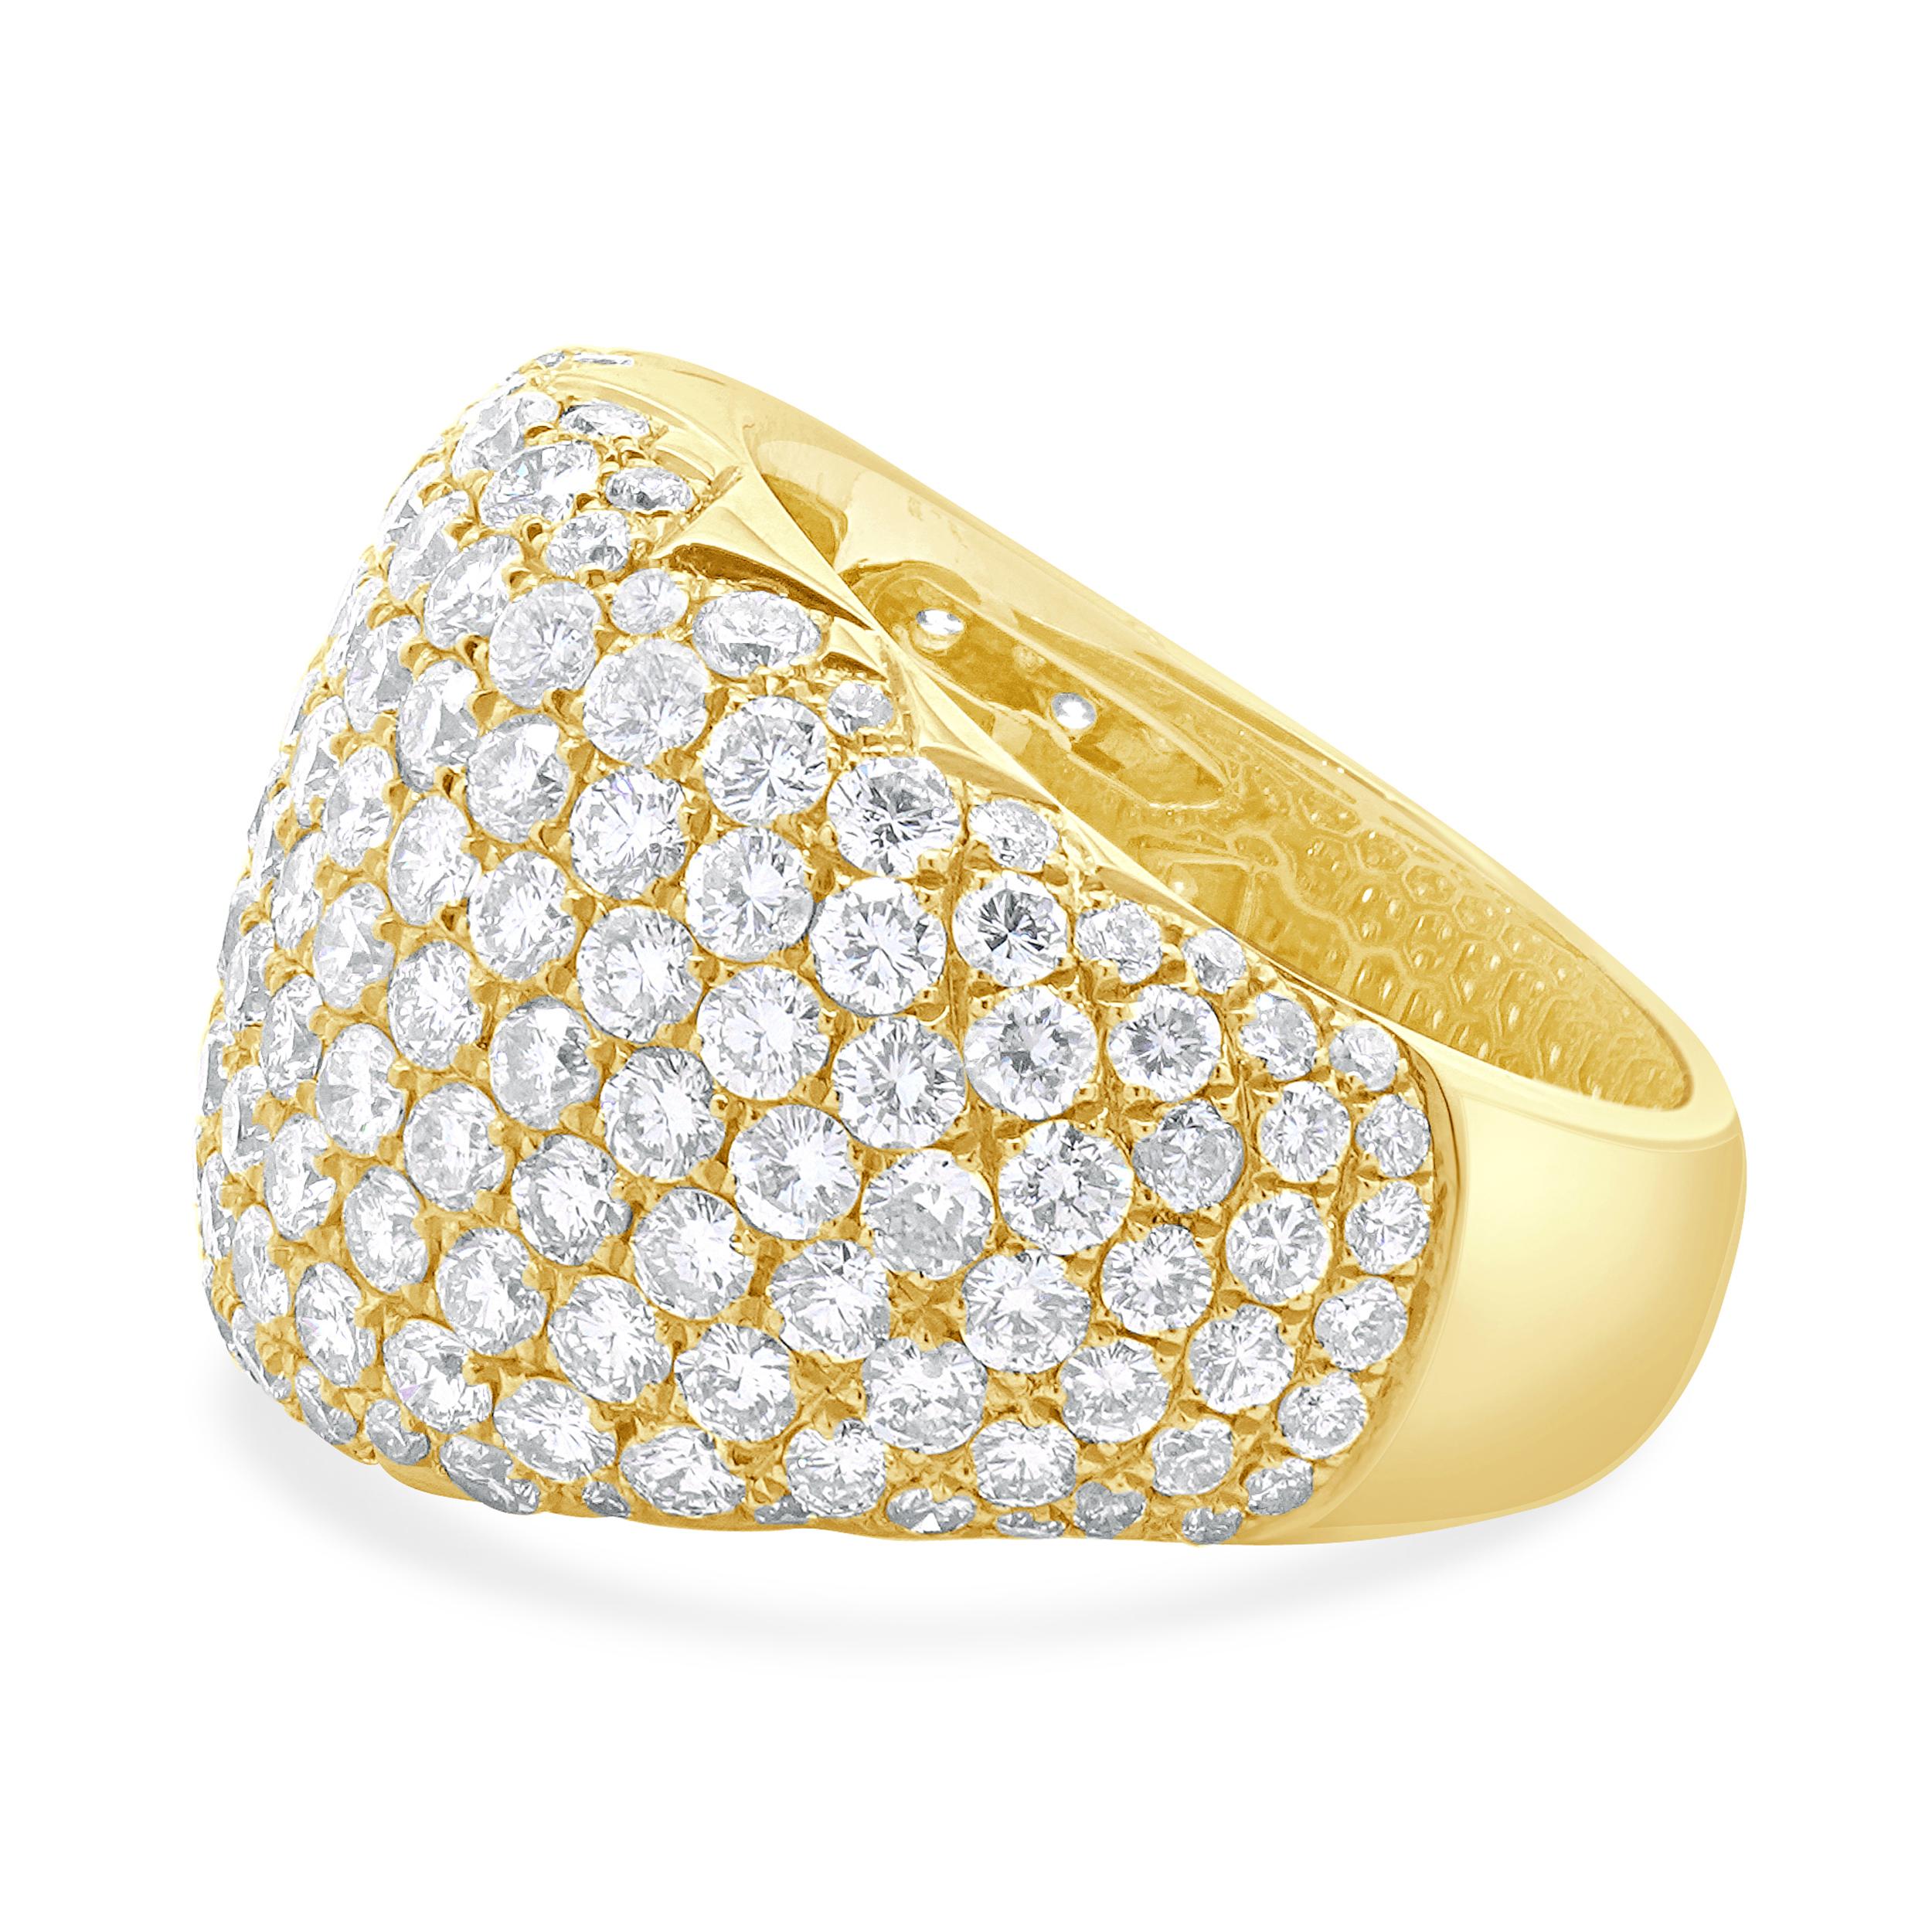 Designer: custom
Material: 18K yellow gold
Diamond: 192 round brilliant cut = 5.10cttw
Color: G
Clarity: VS
Ring size: 6 (please allow two additional shipping days for sizing requests)
Weight: 13.89 grams
